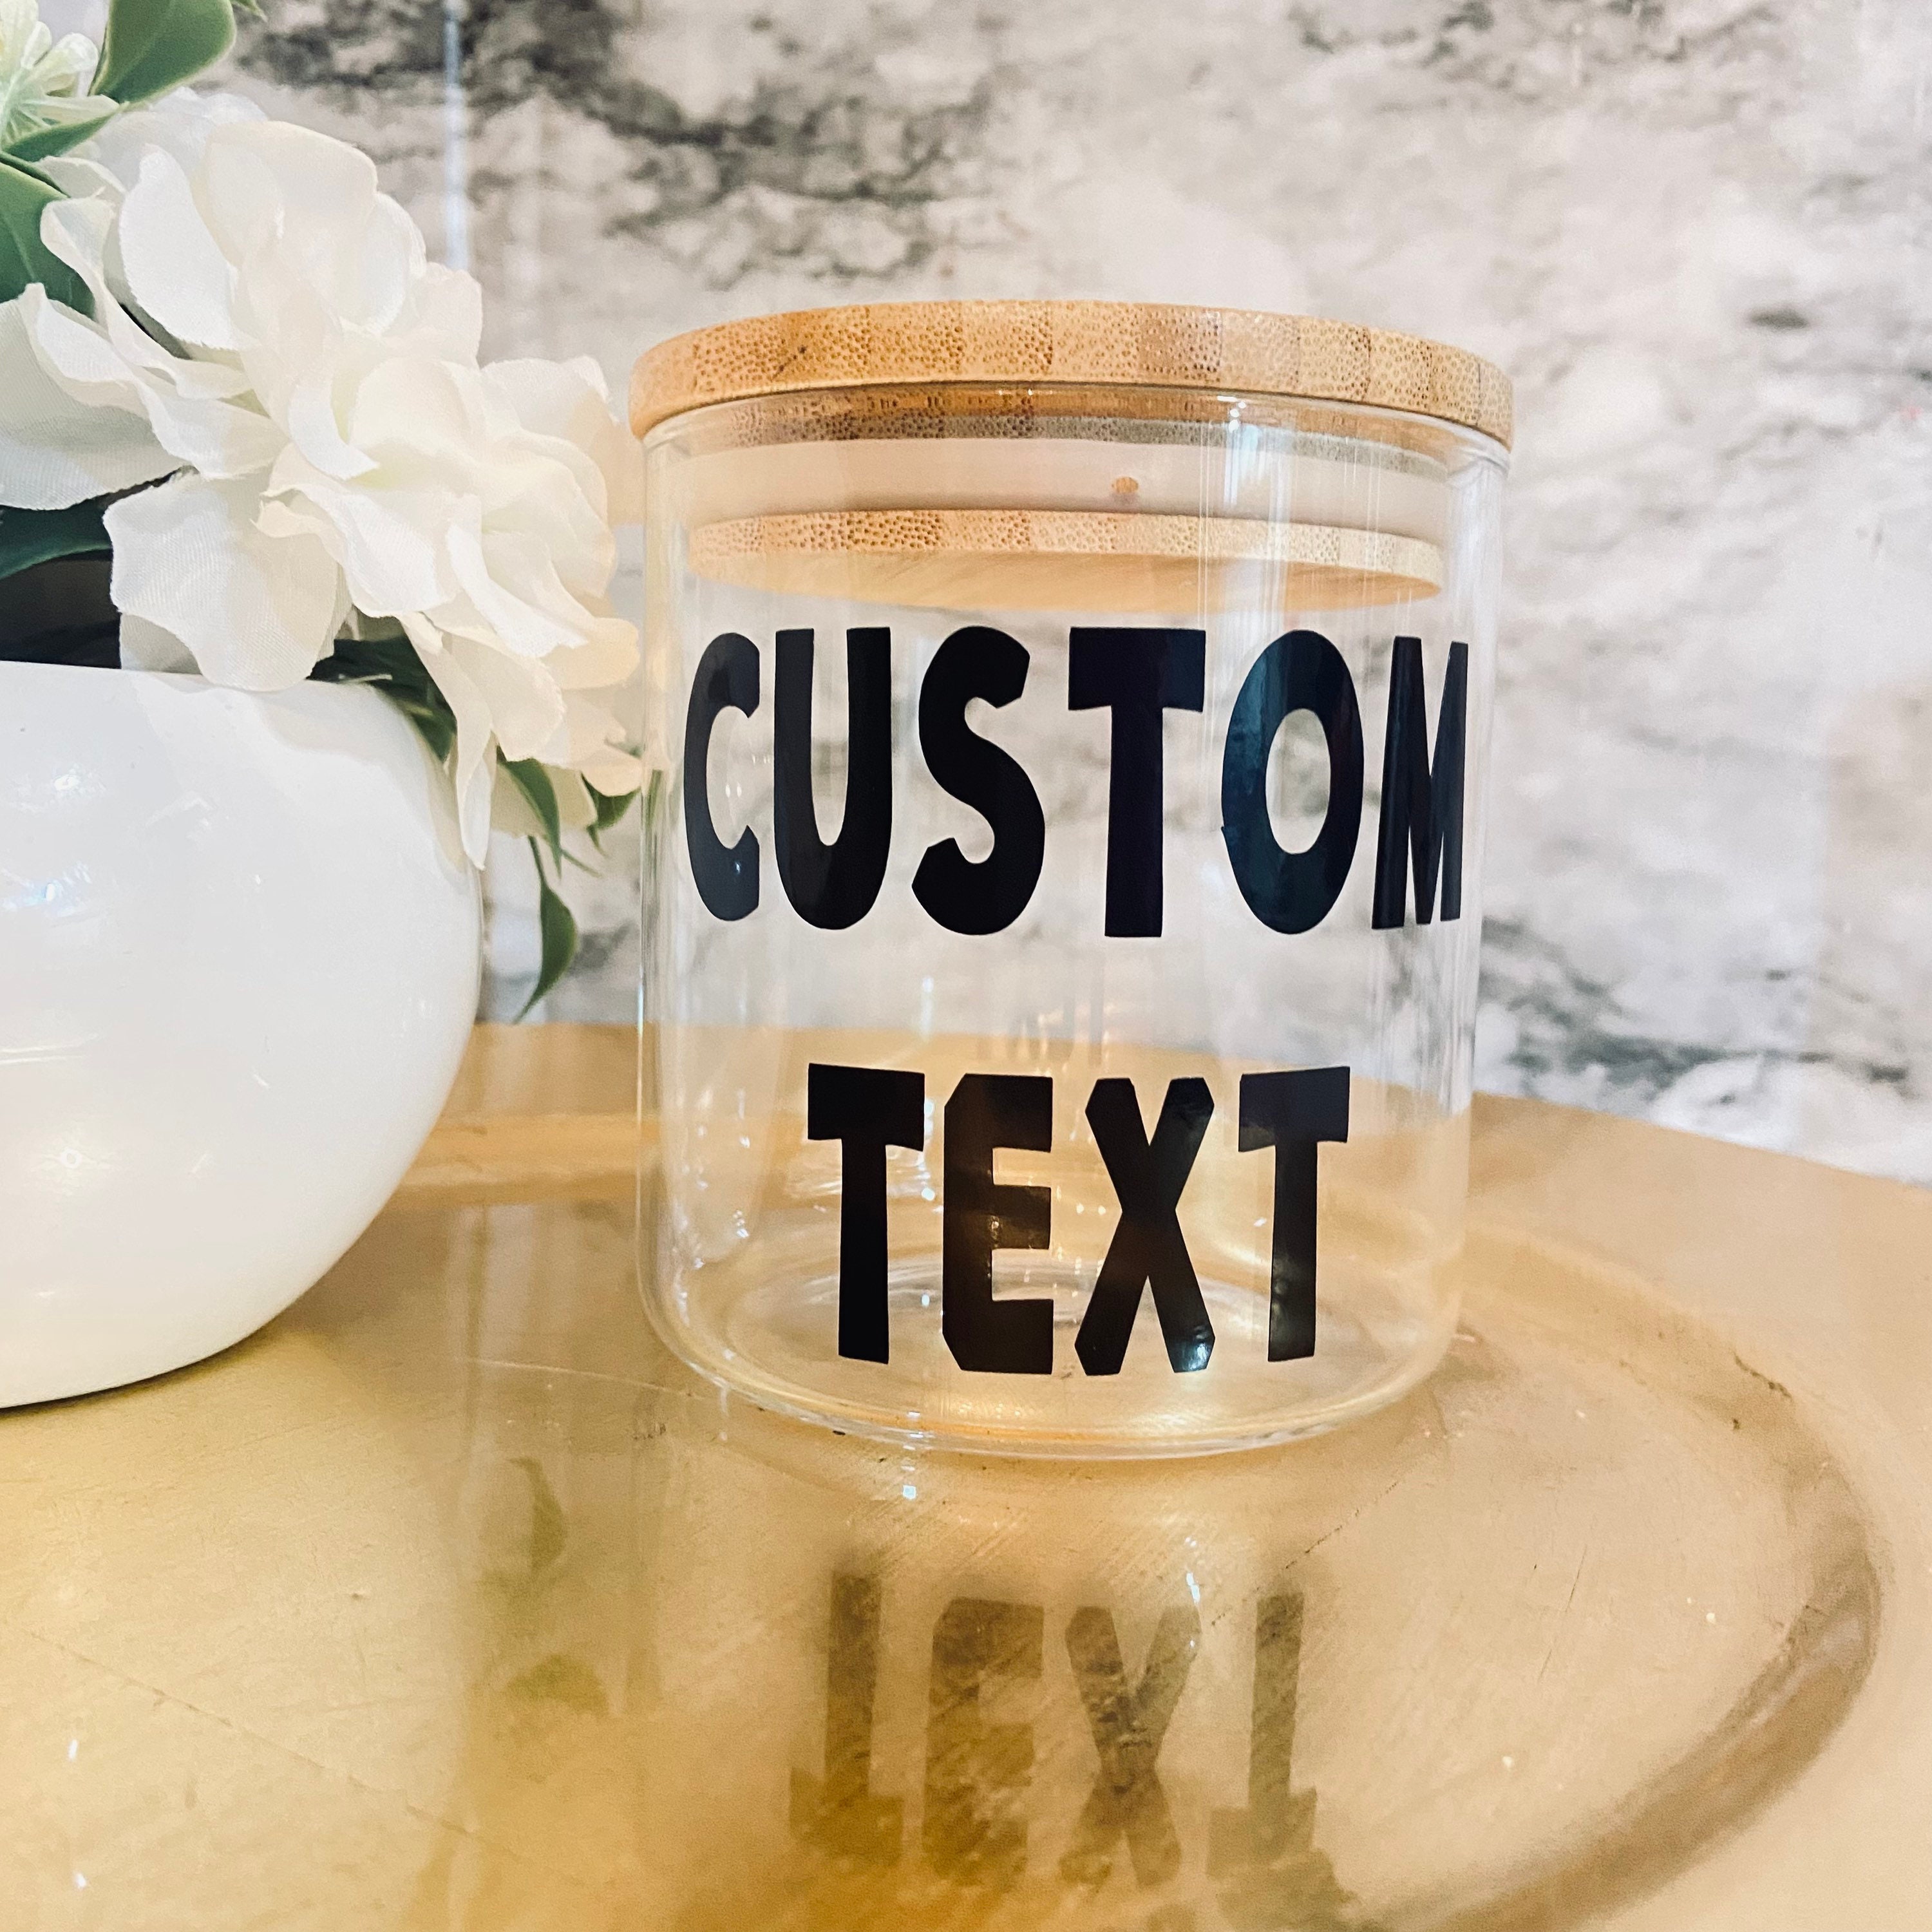 wholesale glass candy jars with ceramics